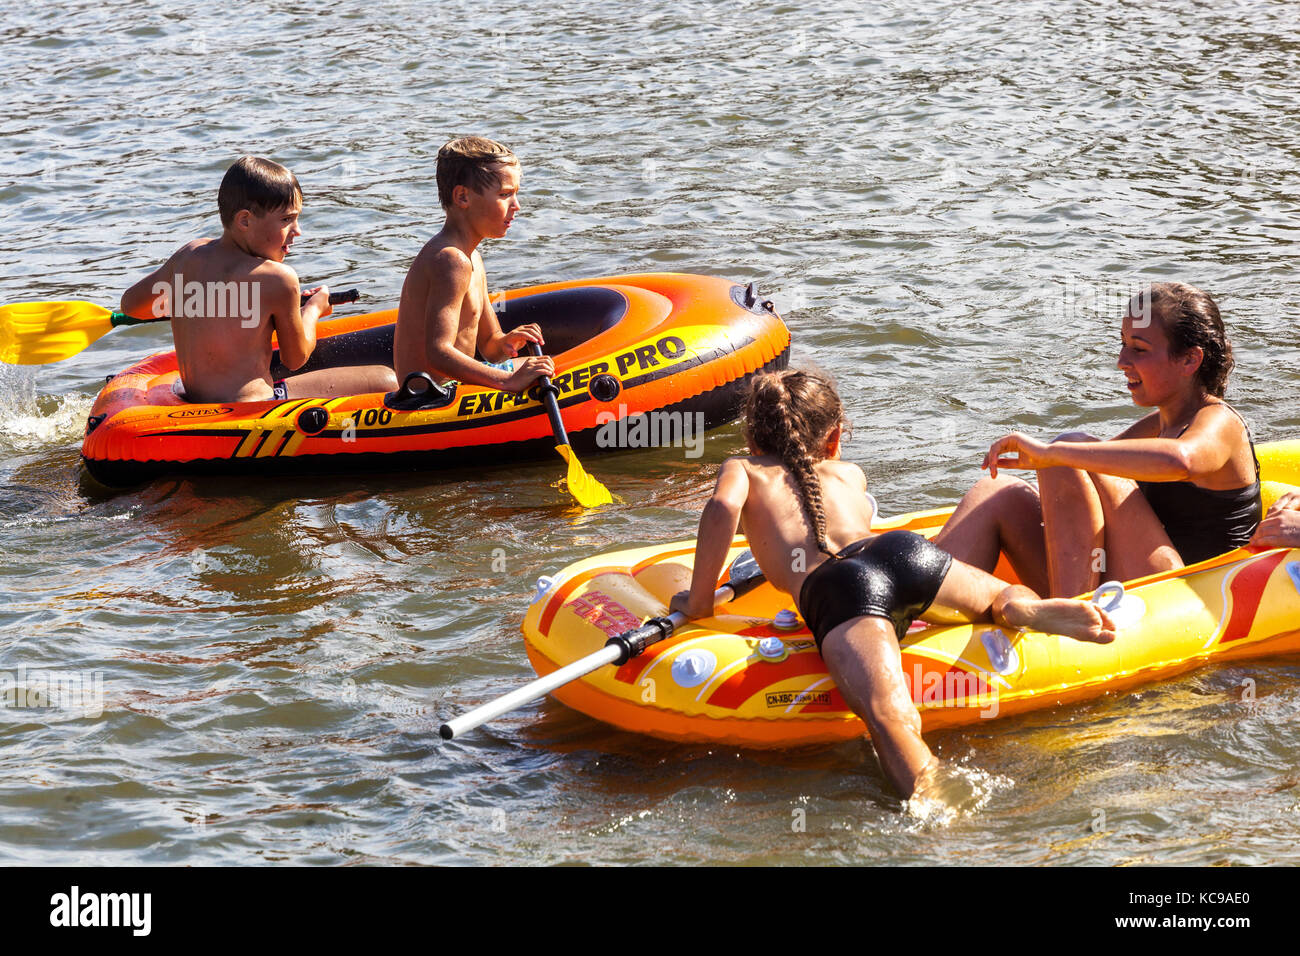 Children in inflatable boats, summer fun on the water, summertime fun Stock Photo